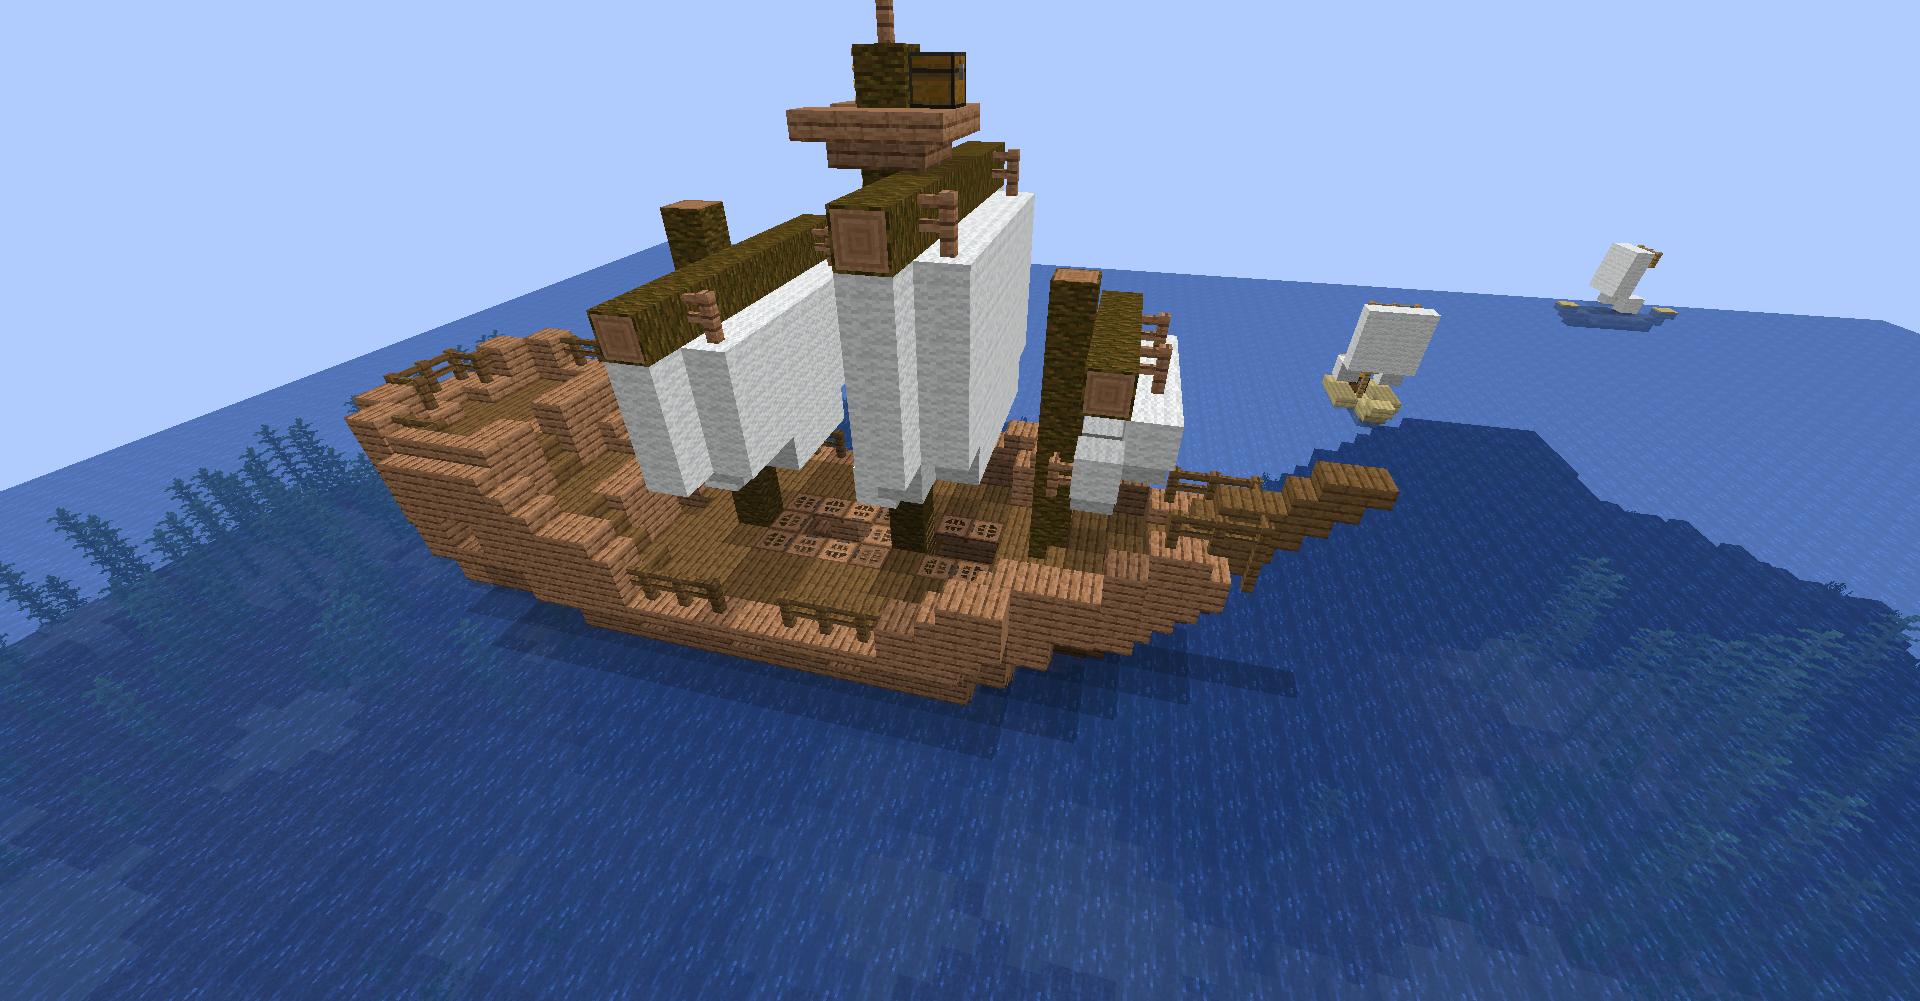 a warm ship with open sails